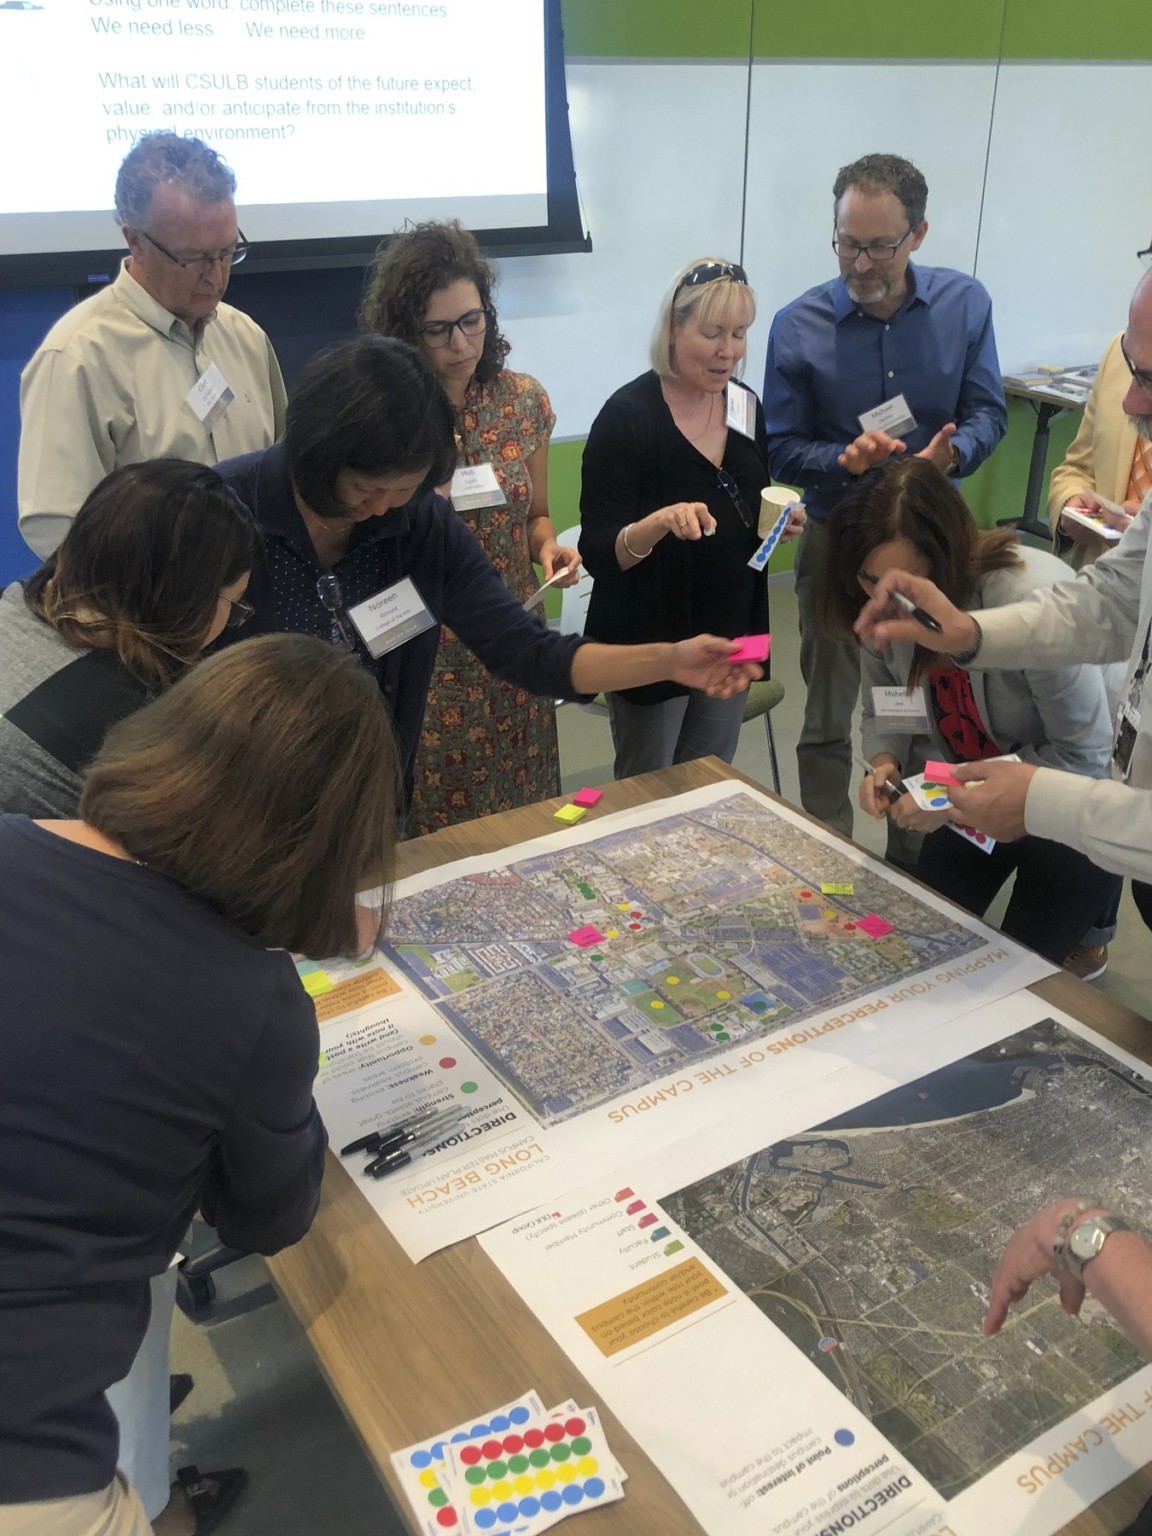 University stakeholders working together in a visioning session for the master plan looking at a campus map and making notes